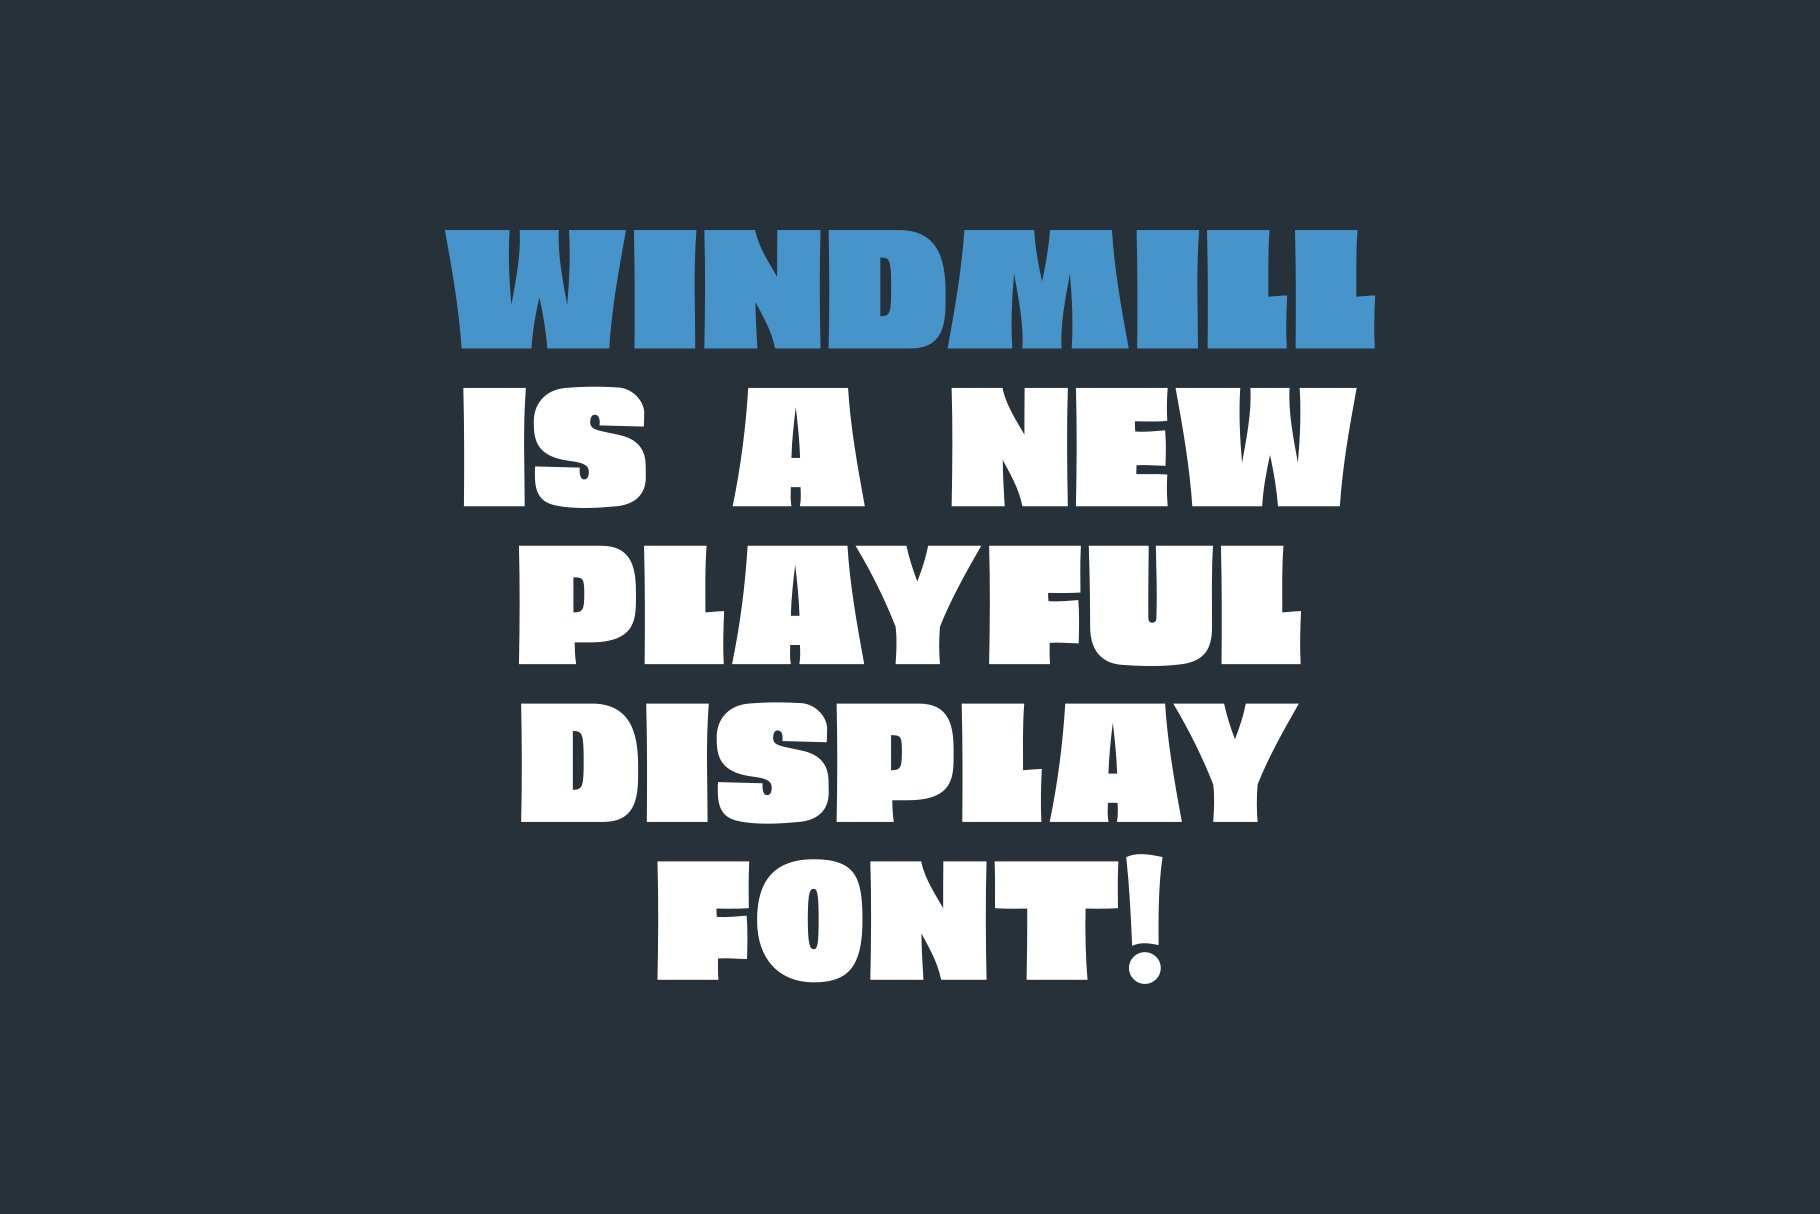 The words windmill is a new playful display font.